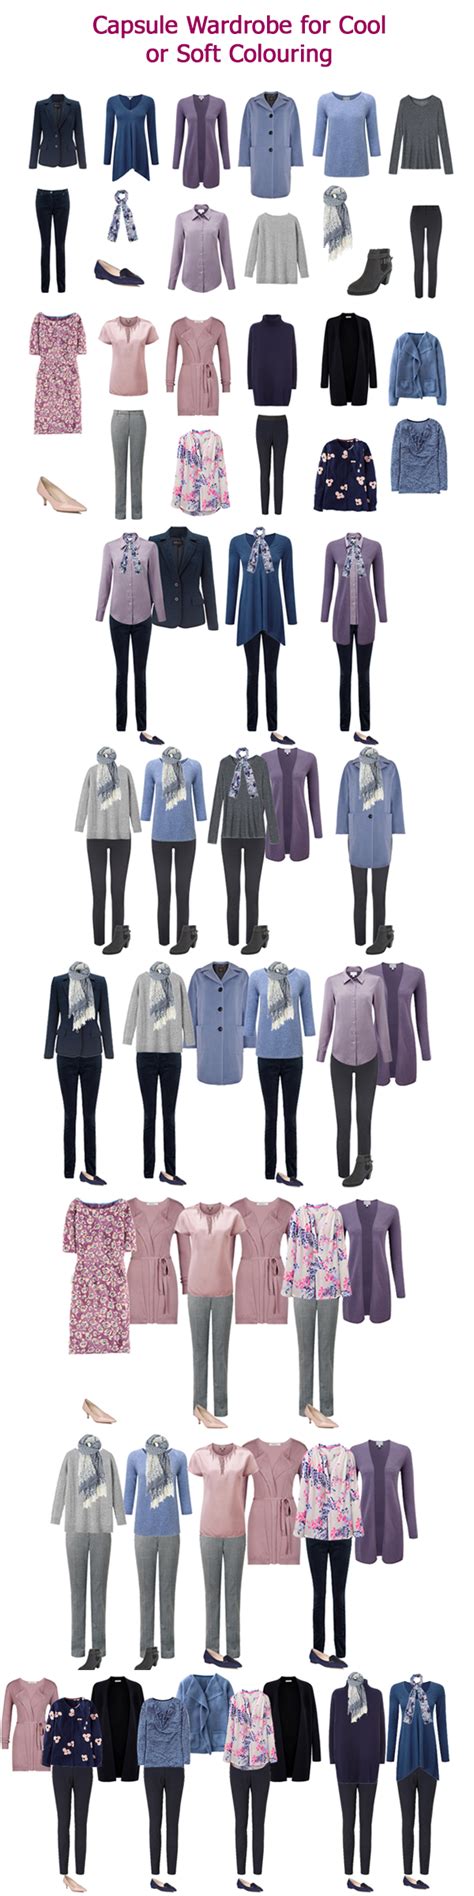 Example Capsule Wardrobe For Soft Or Cool Colouring I Would Rather Use